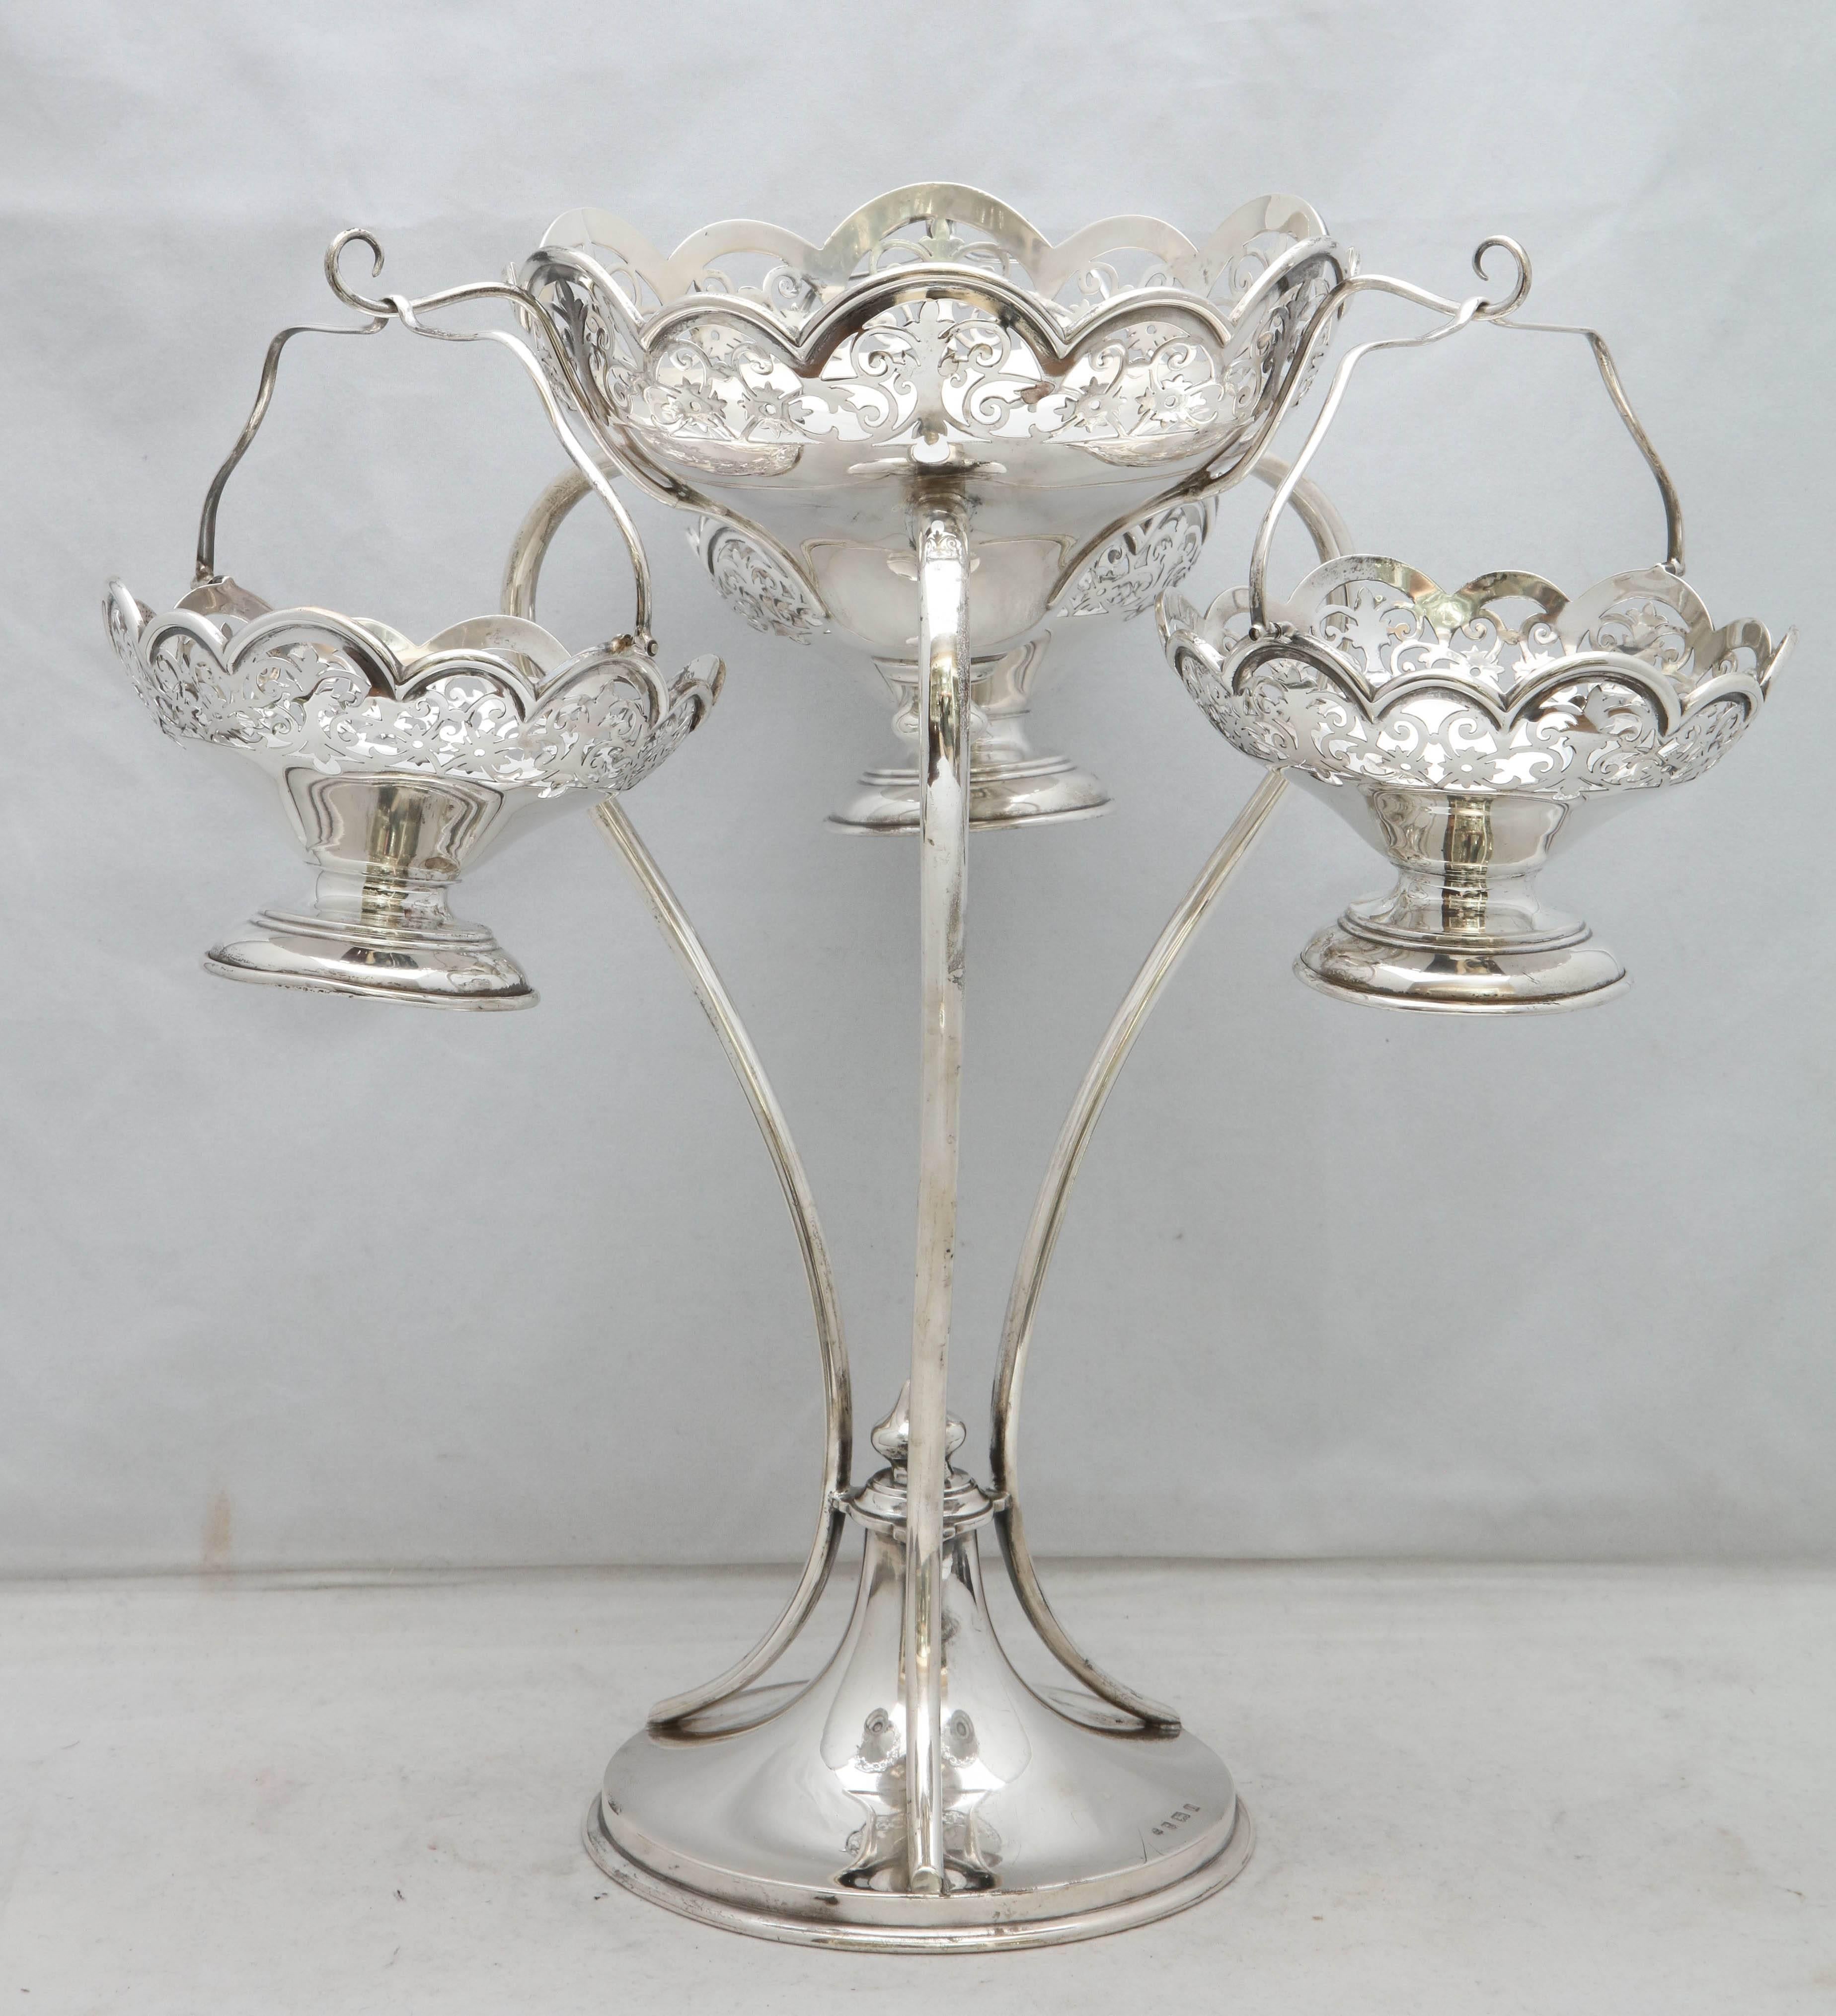 Beautiful, Edwardian-style all sterling silver epergne/centerpiece (made during the reign of King George V) having three hanging, removable sterling silver baskets and one central, stationary bowl, Birmingham, England, 1919, Charles S. Green and Co.